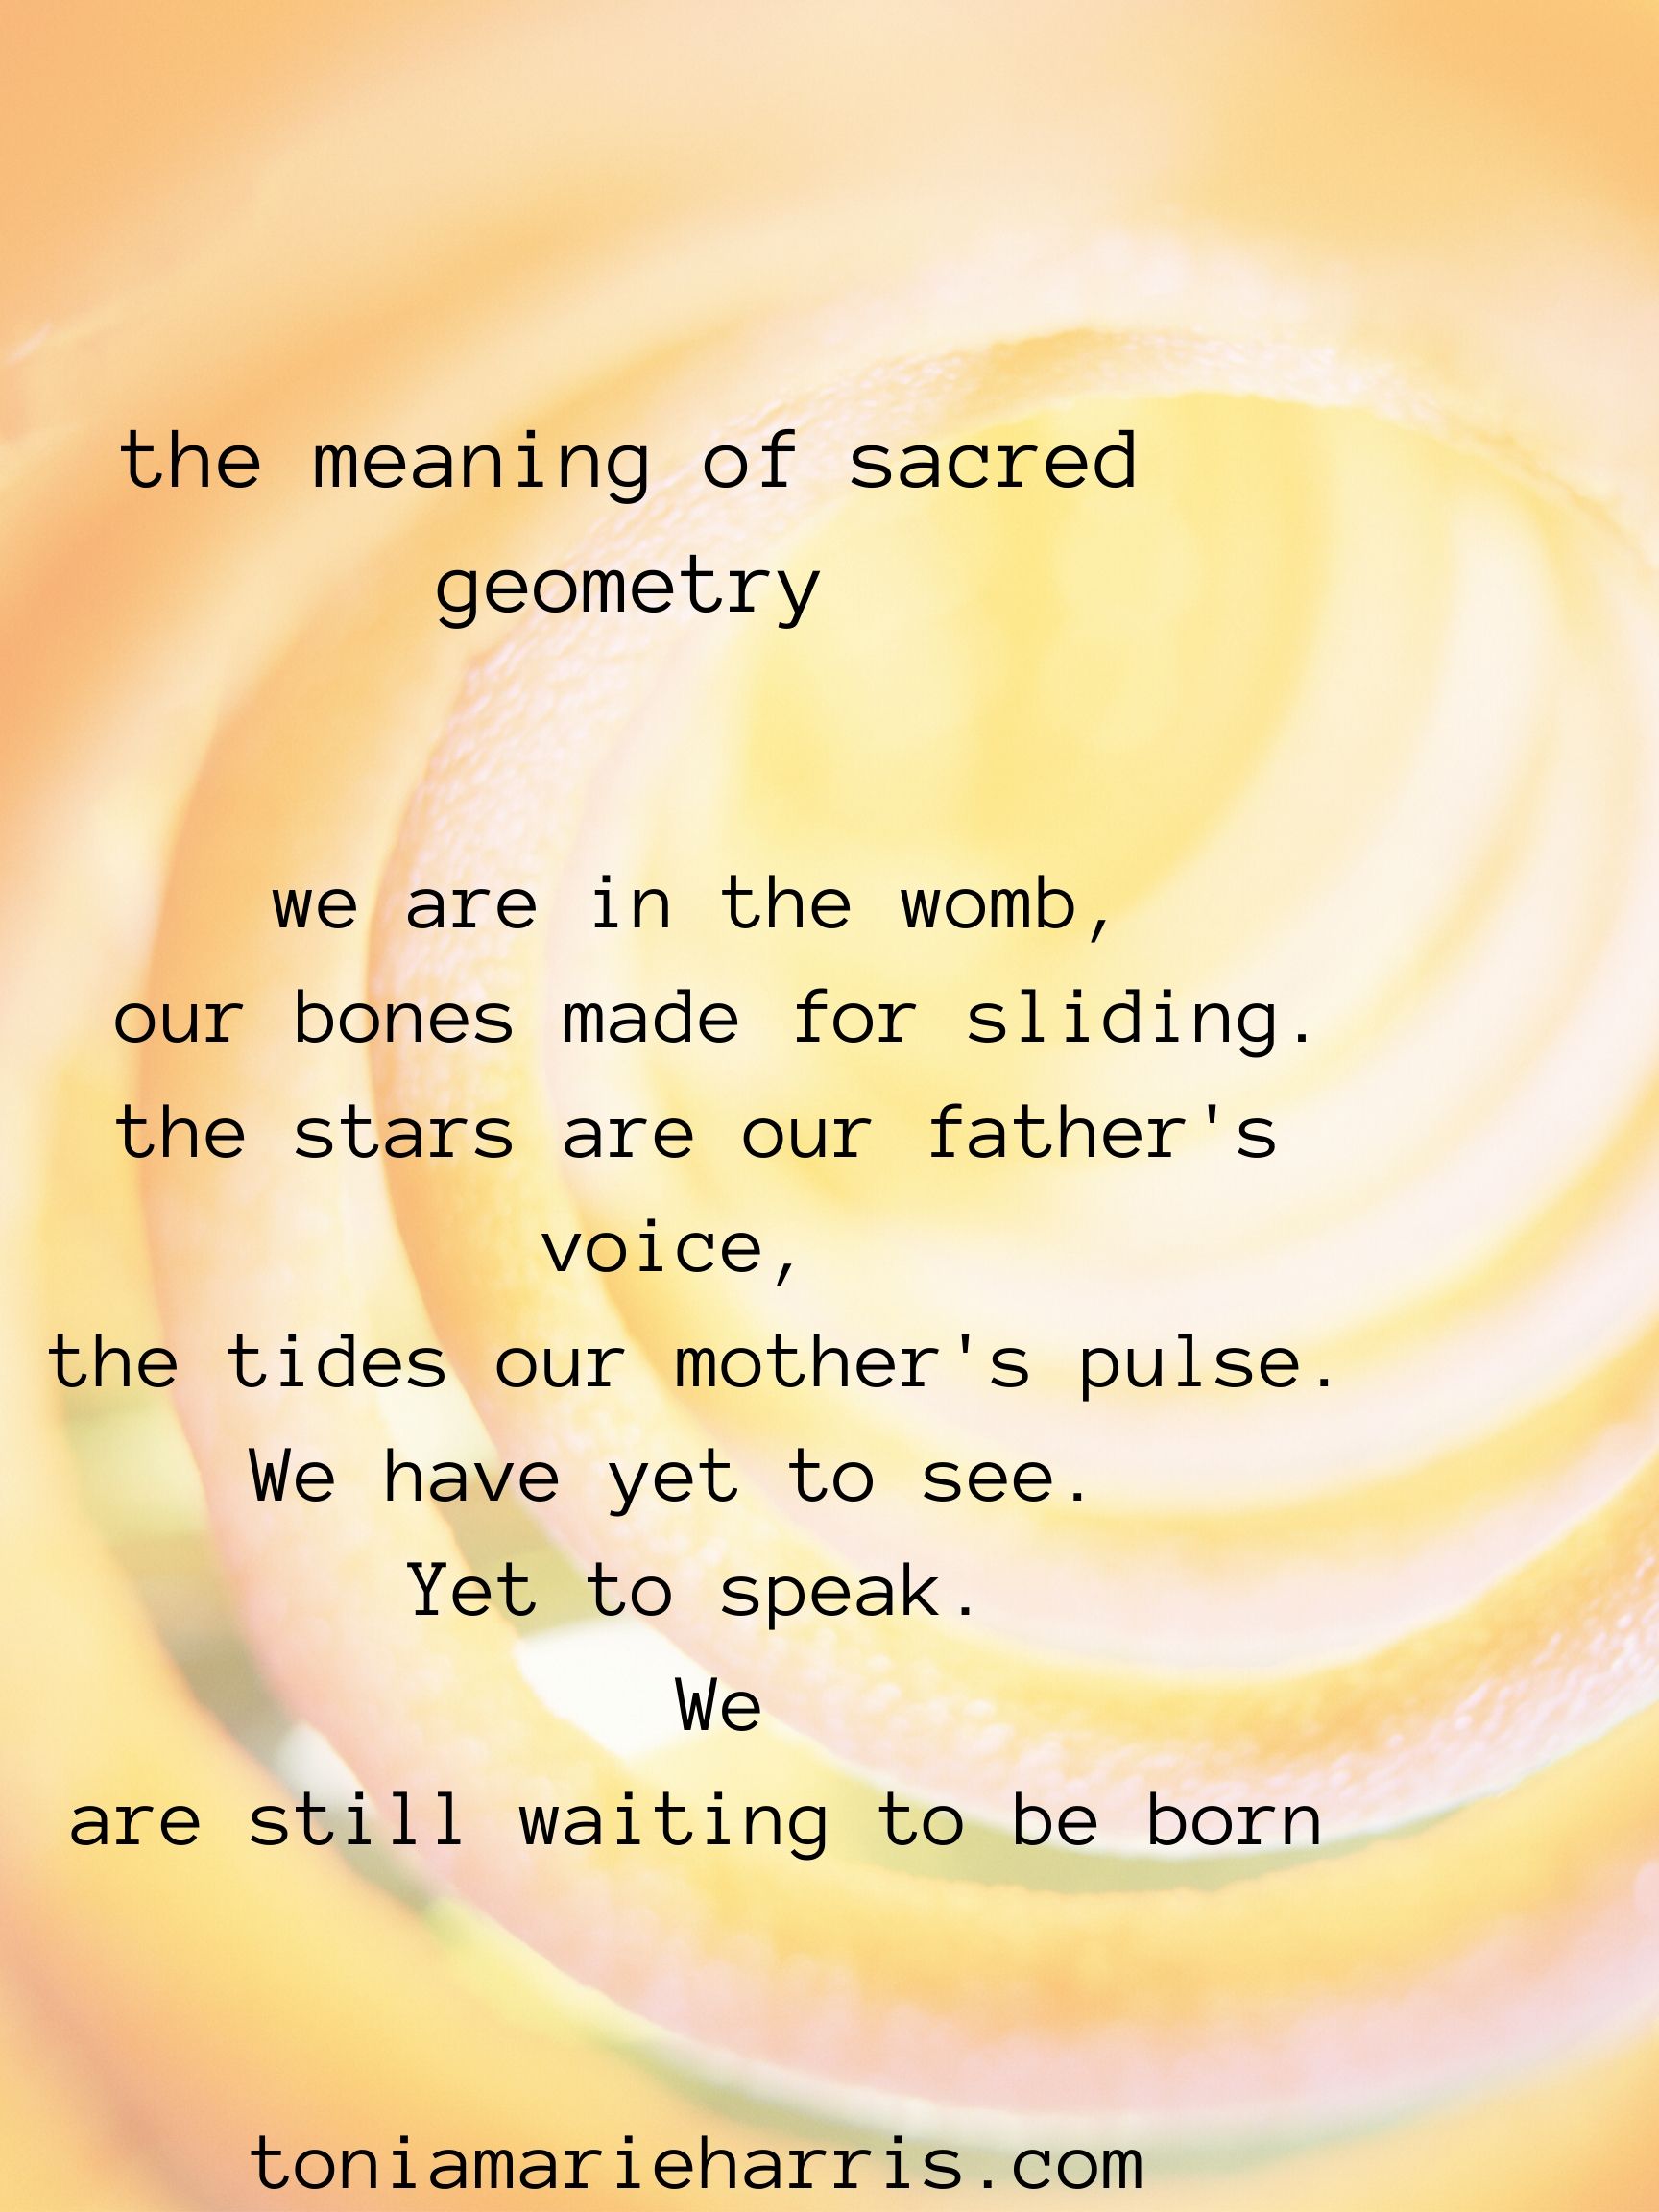 the meaning of sacred geometry